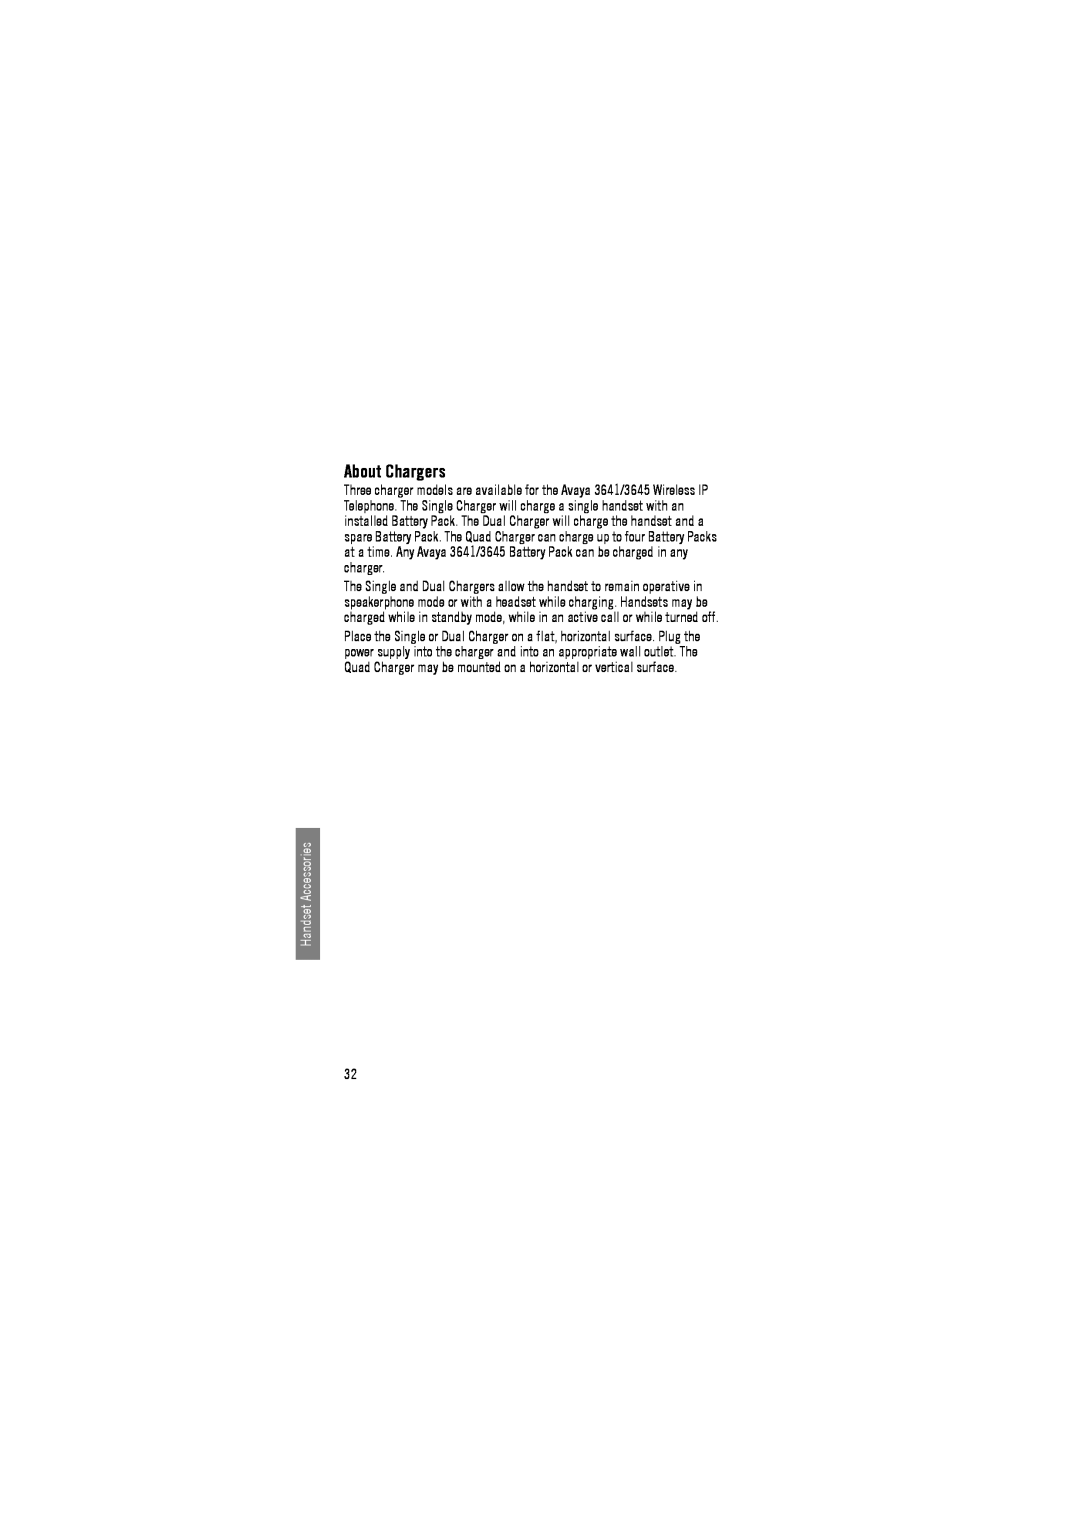 Avaya 3641, 3645 manual About Chargers, Handset Accessories 